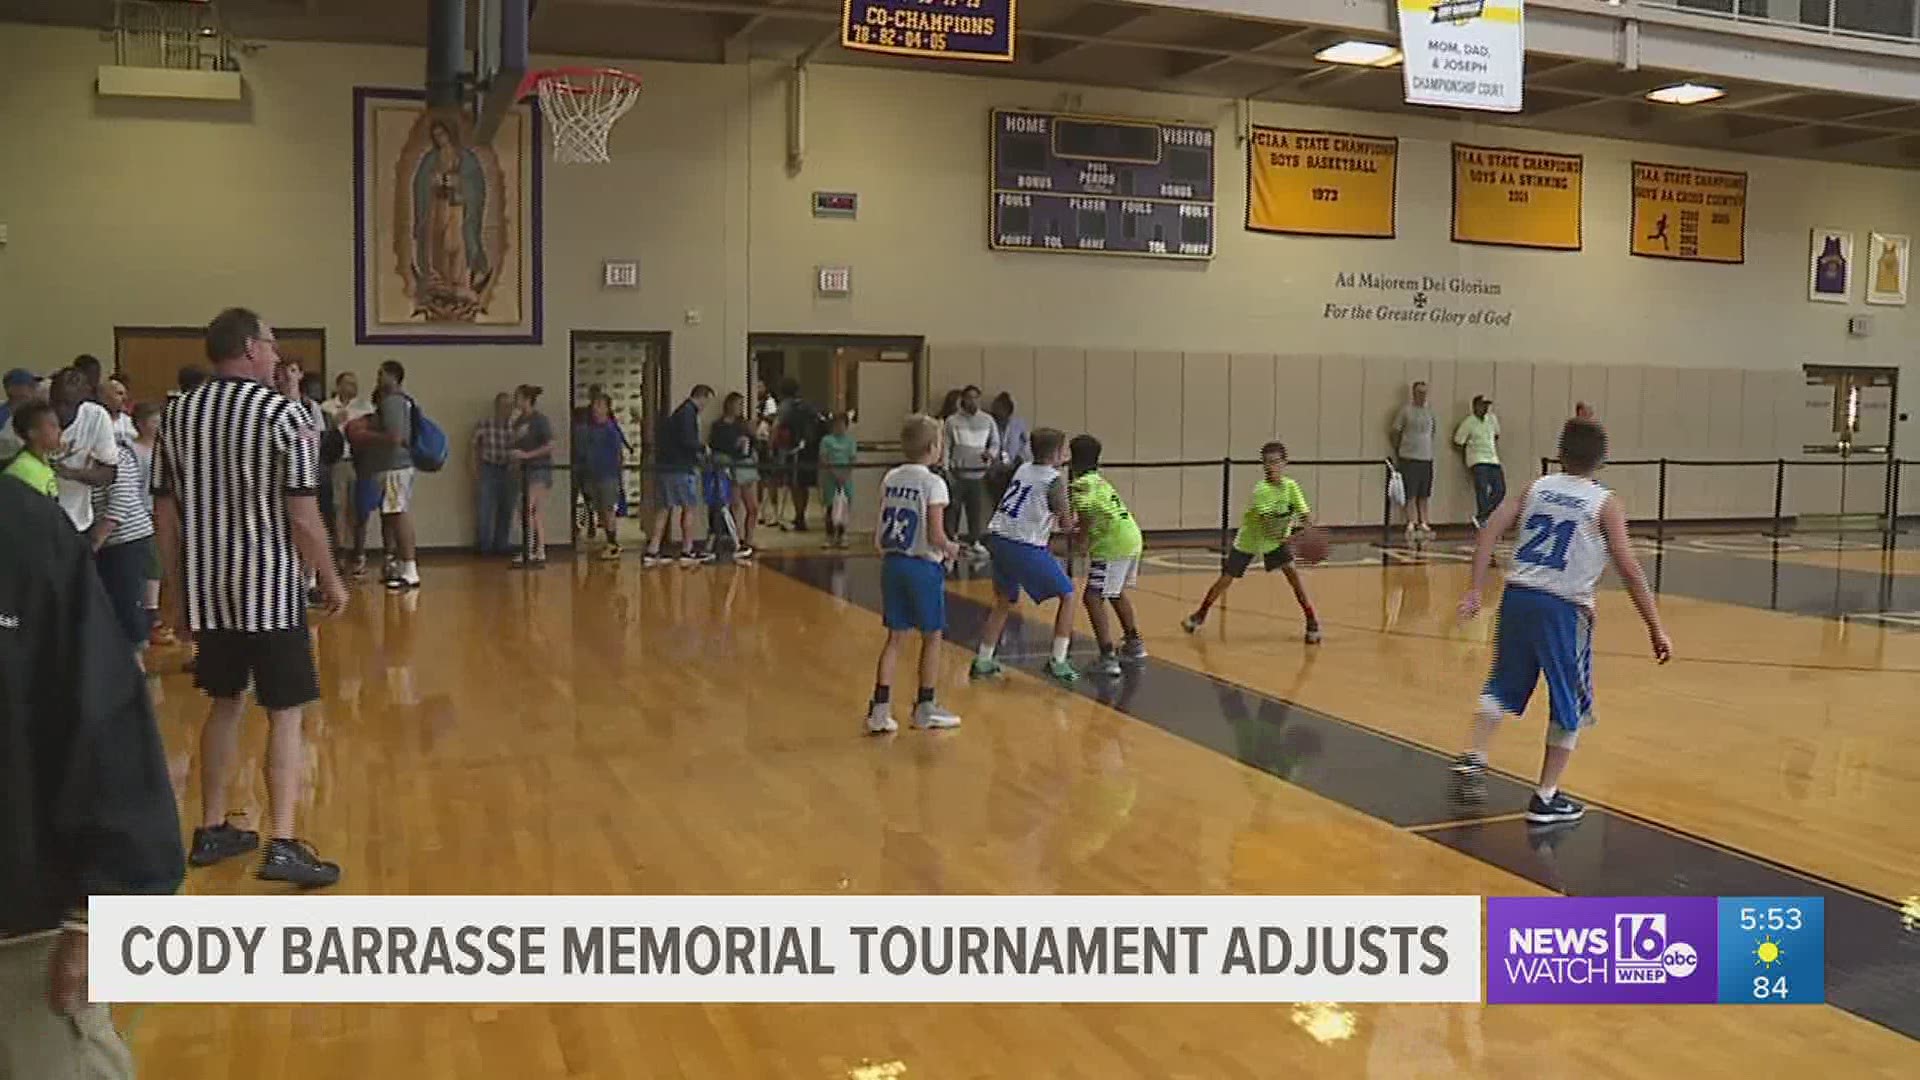 Cody Barrasse Memorial basketball tournament is now a shooting contest